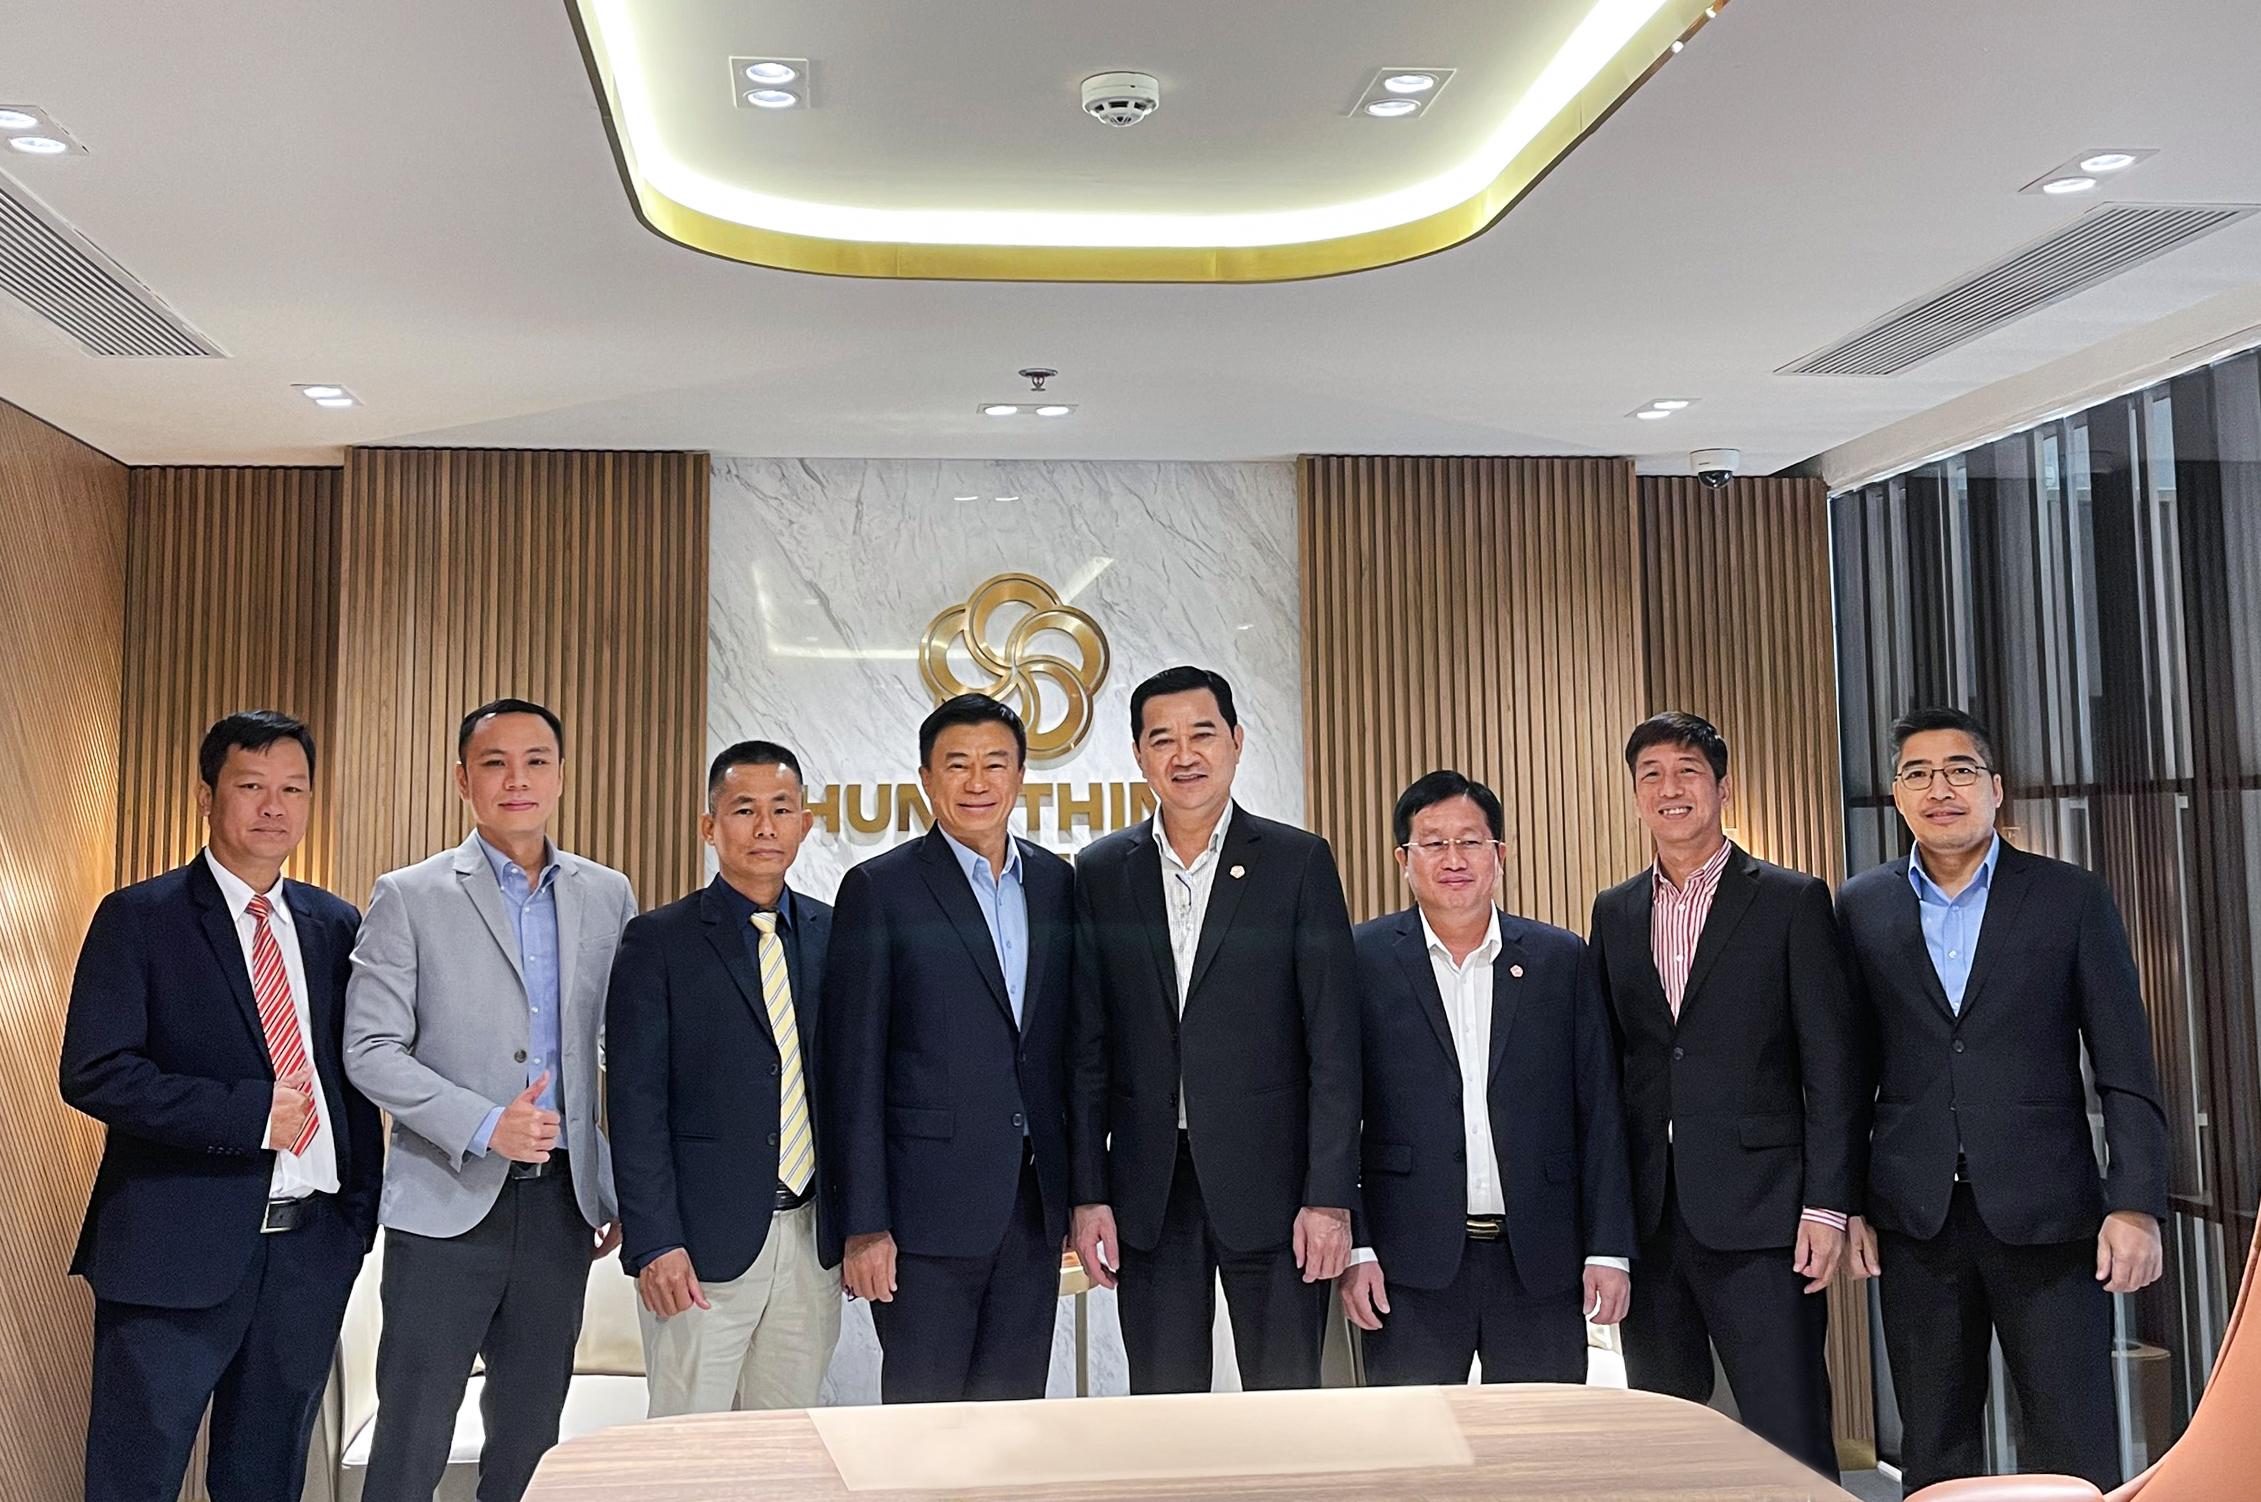 KONE - A LEADING CORPORATION IN ELEVATOR, ESCALATOR VISITS AND WORKS WITH HUNG THINH CORPORATION 